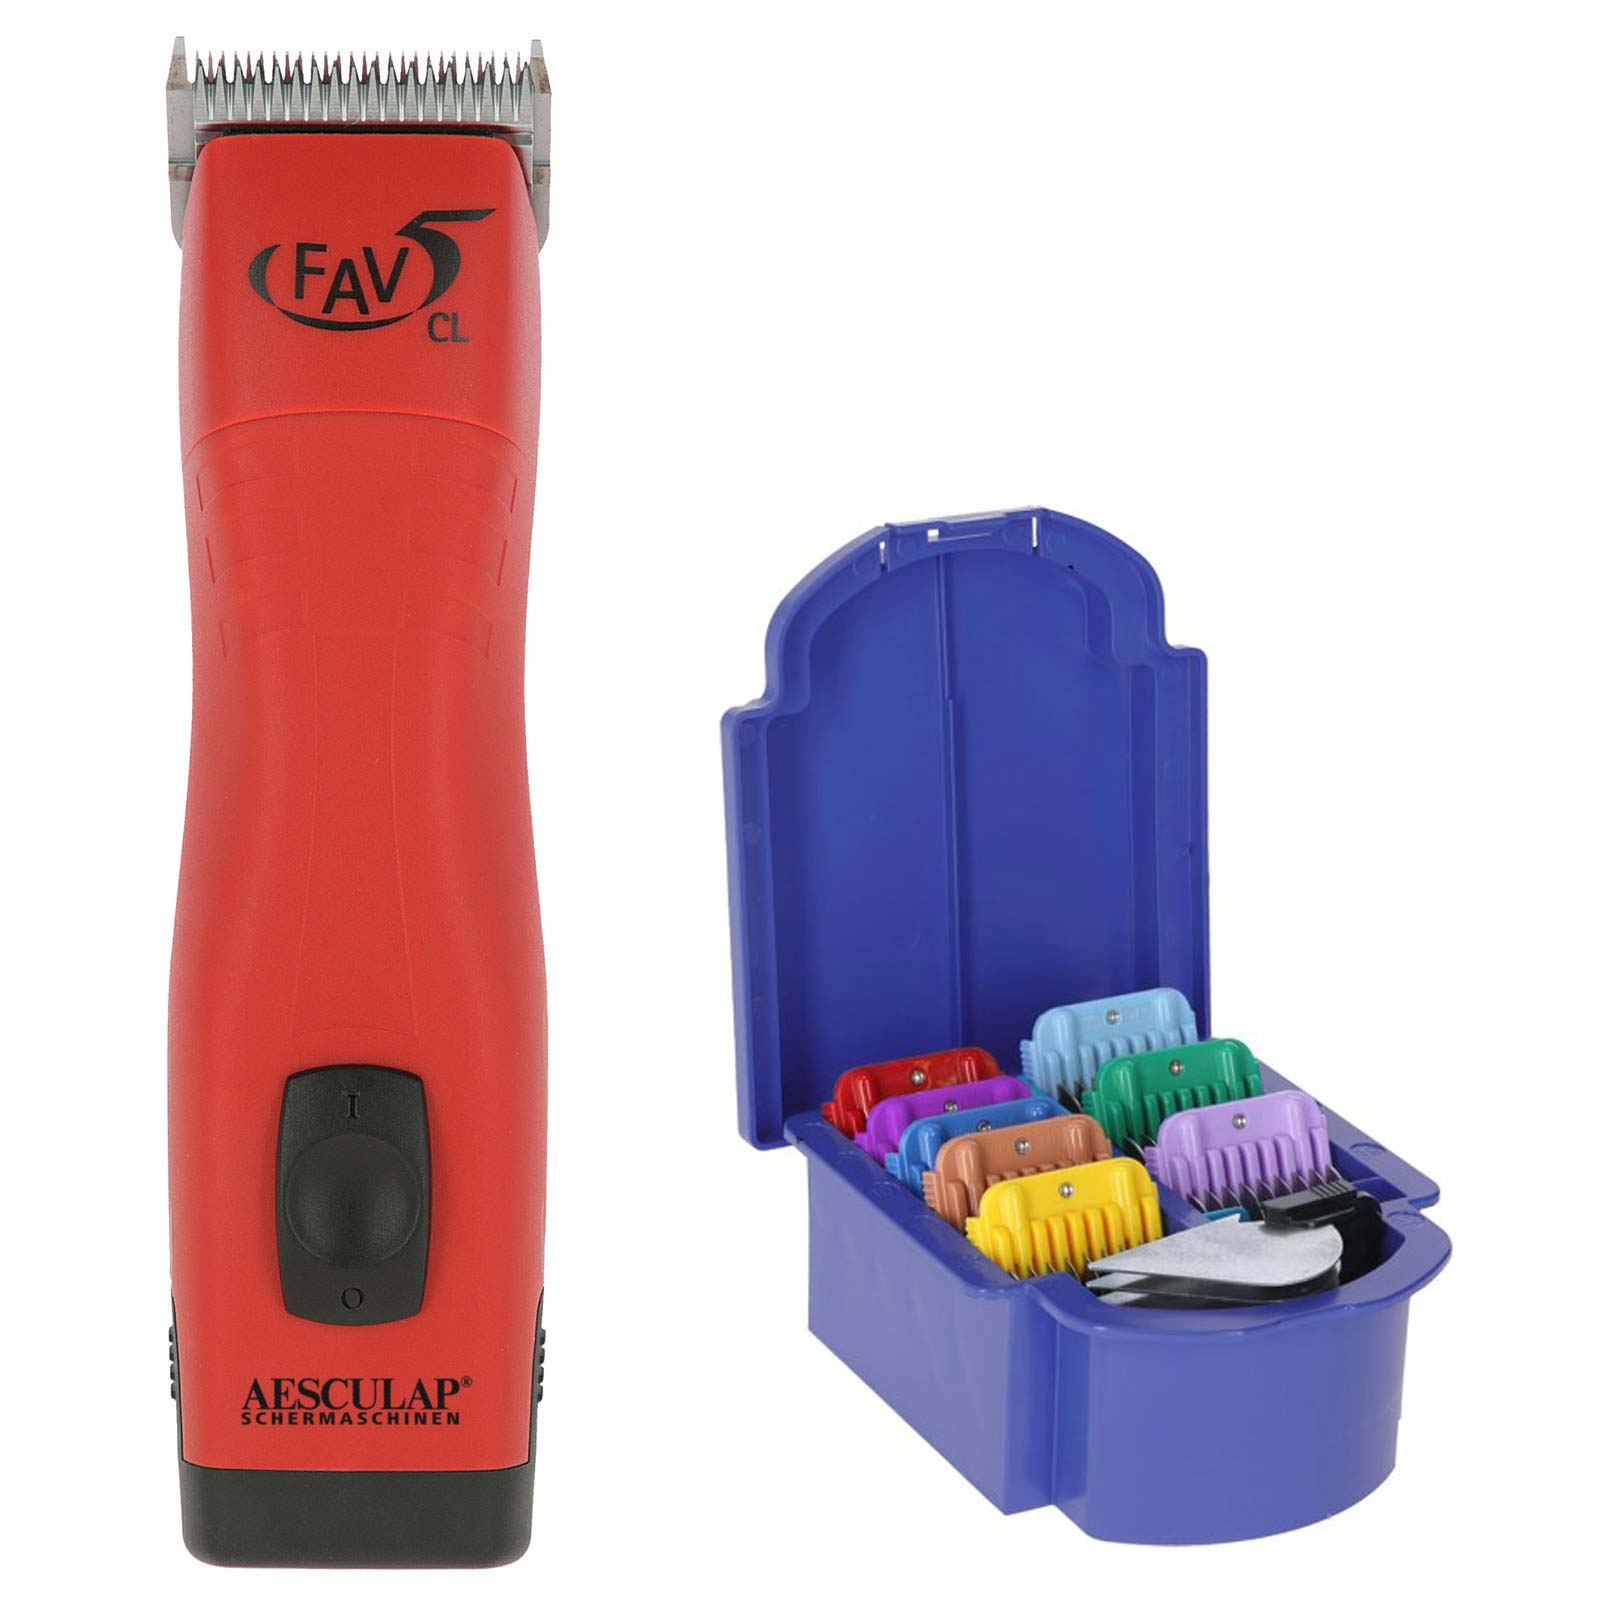 Aesculap FAV5 CL Clipper battery with attachment comb set